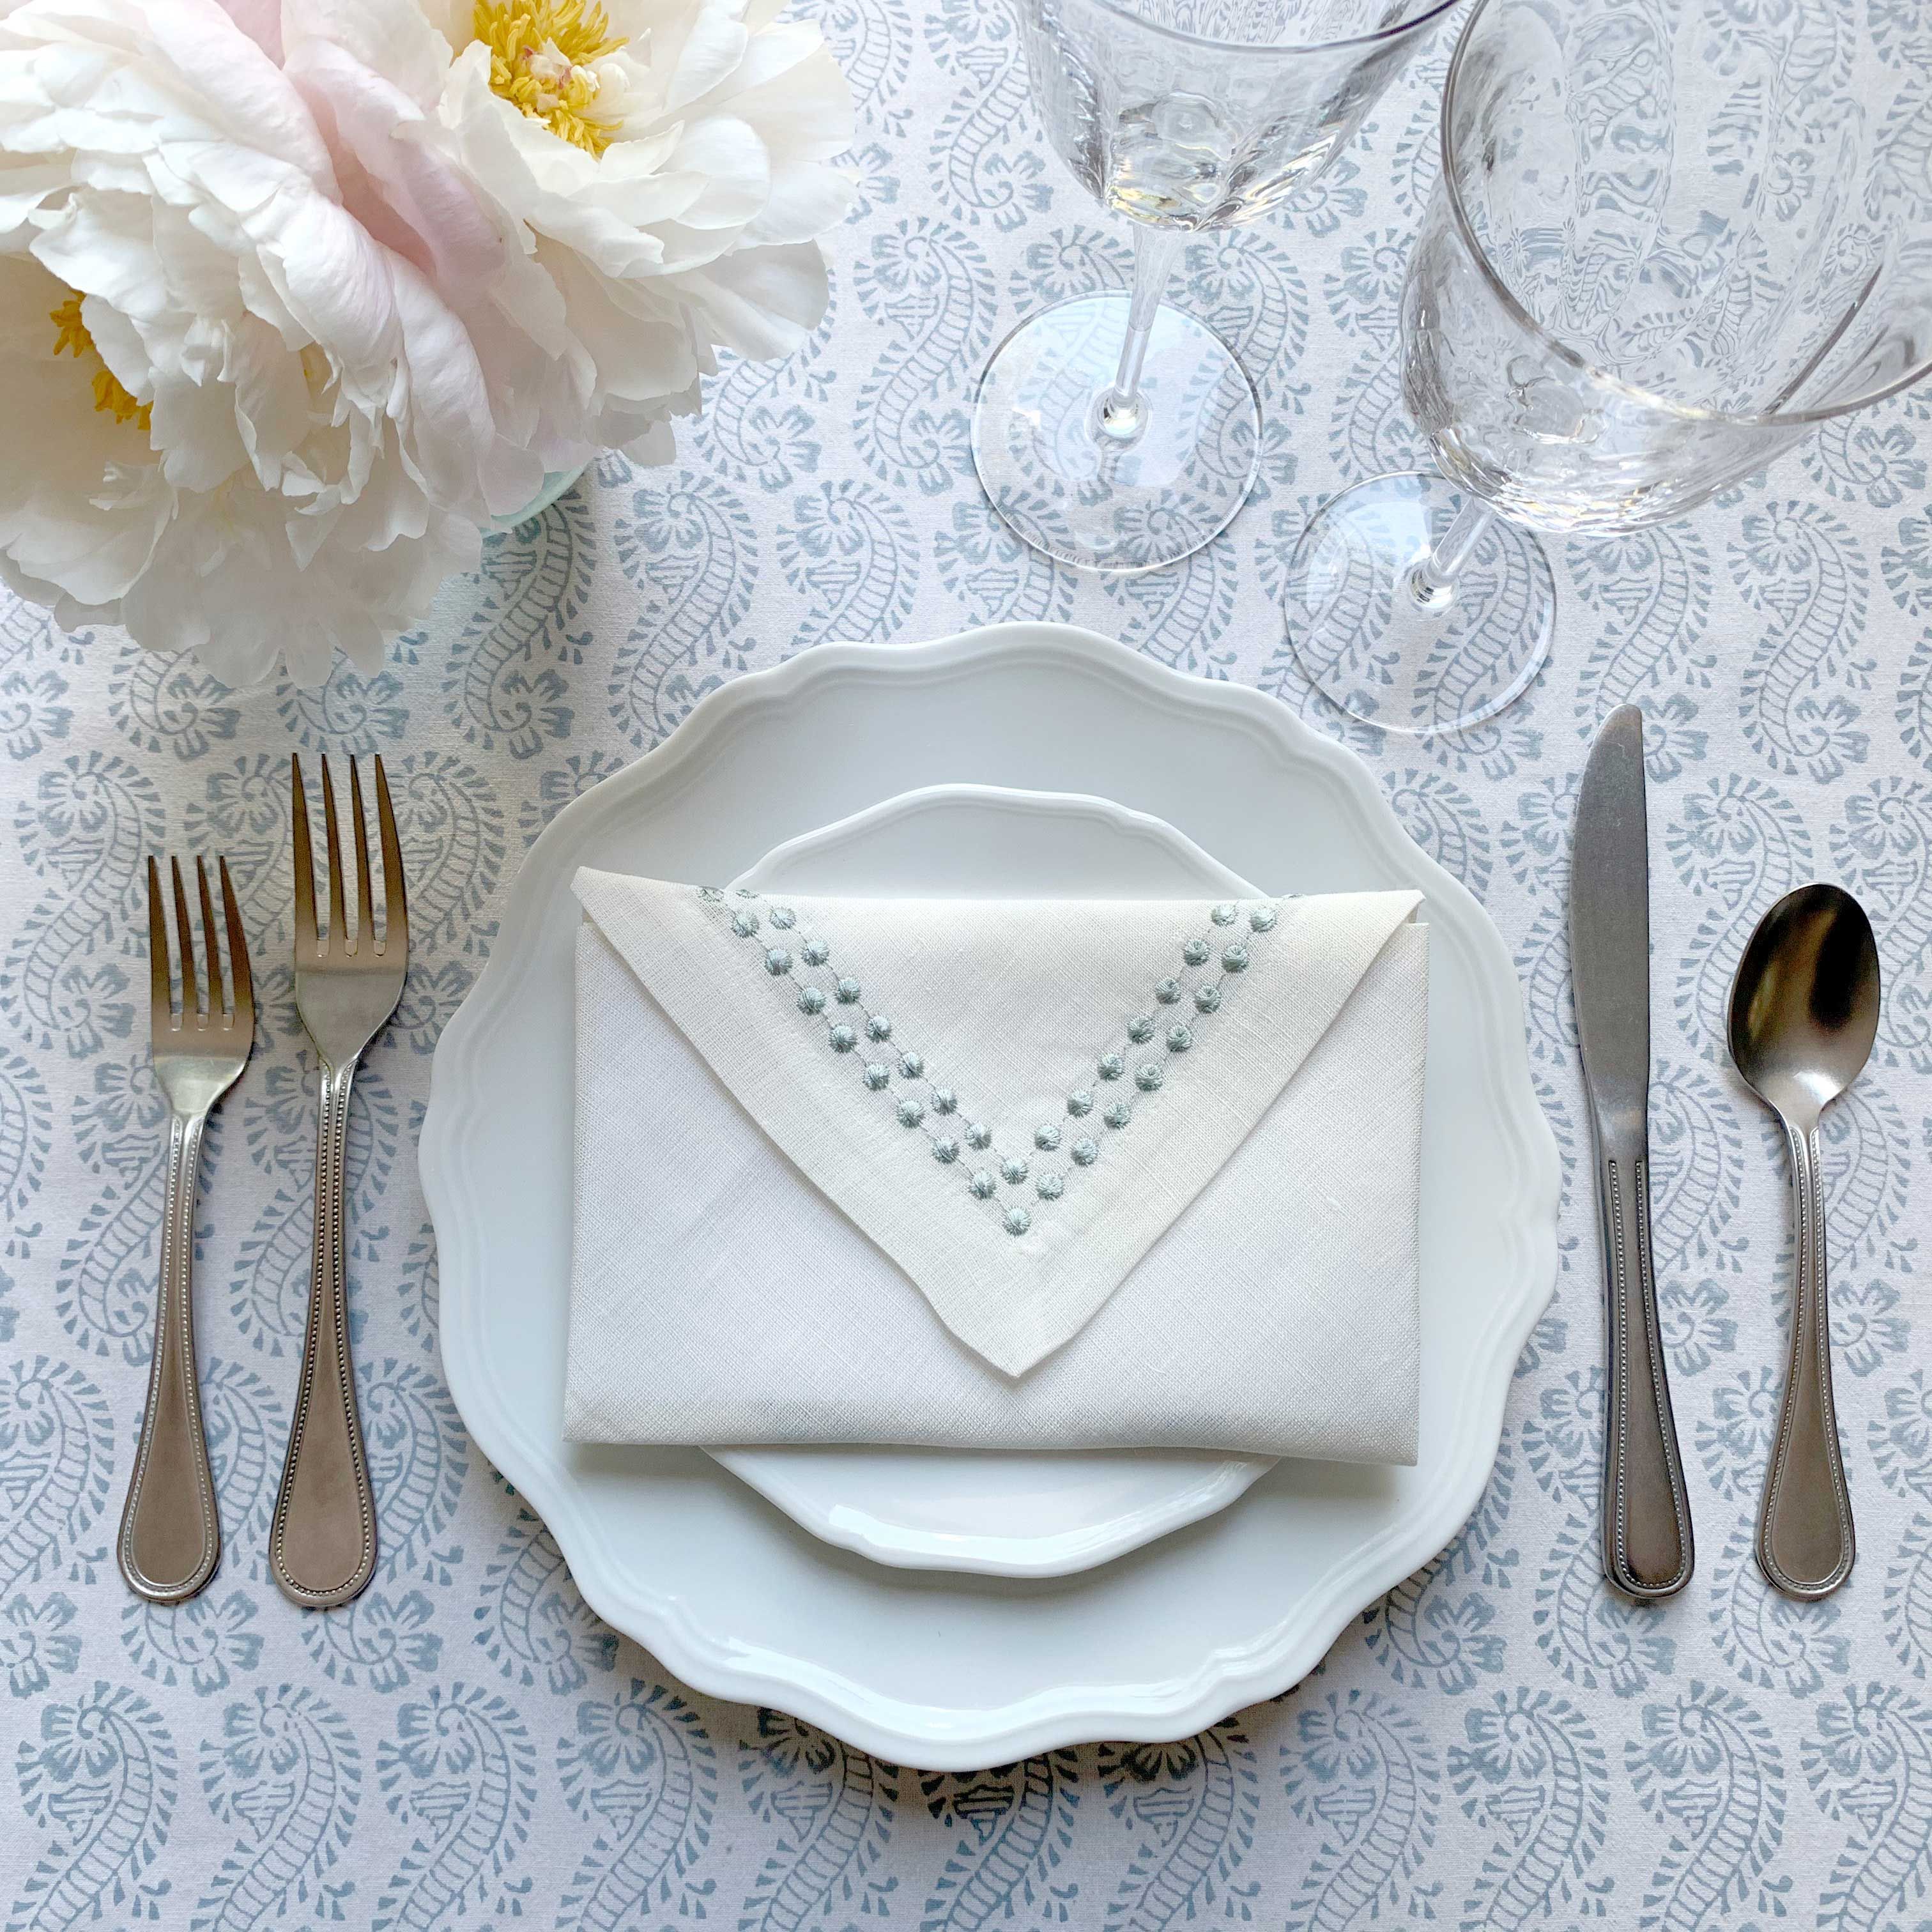 How To Fold A Fancy Dinner Napkin Like Some Kind Of Expert